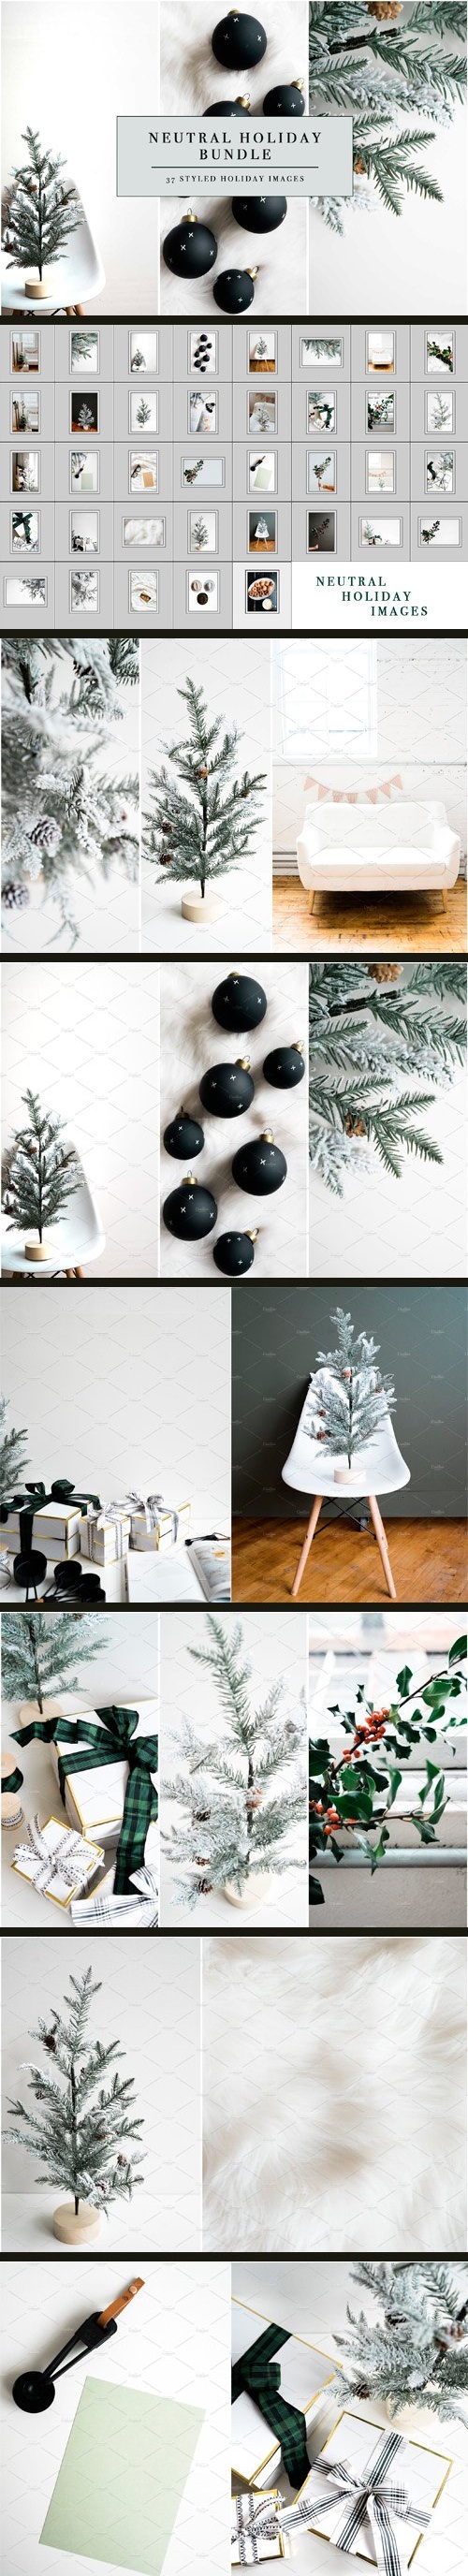 Christmas Styled Stock Images 2040473